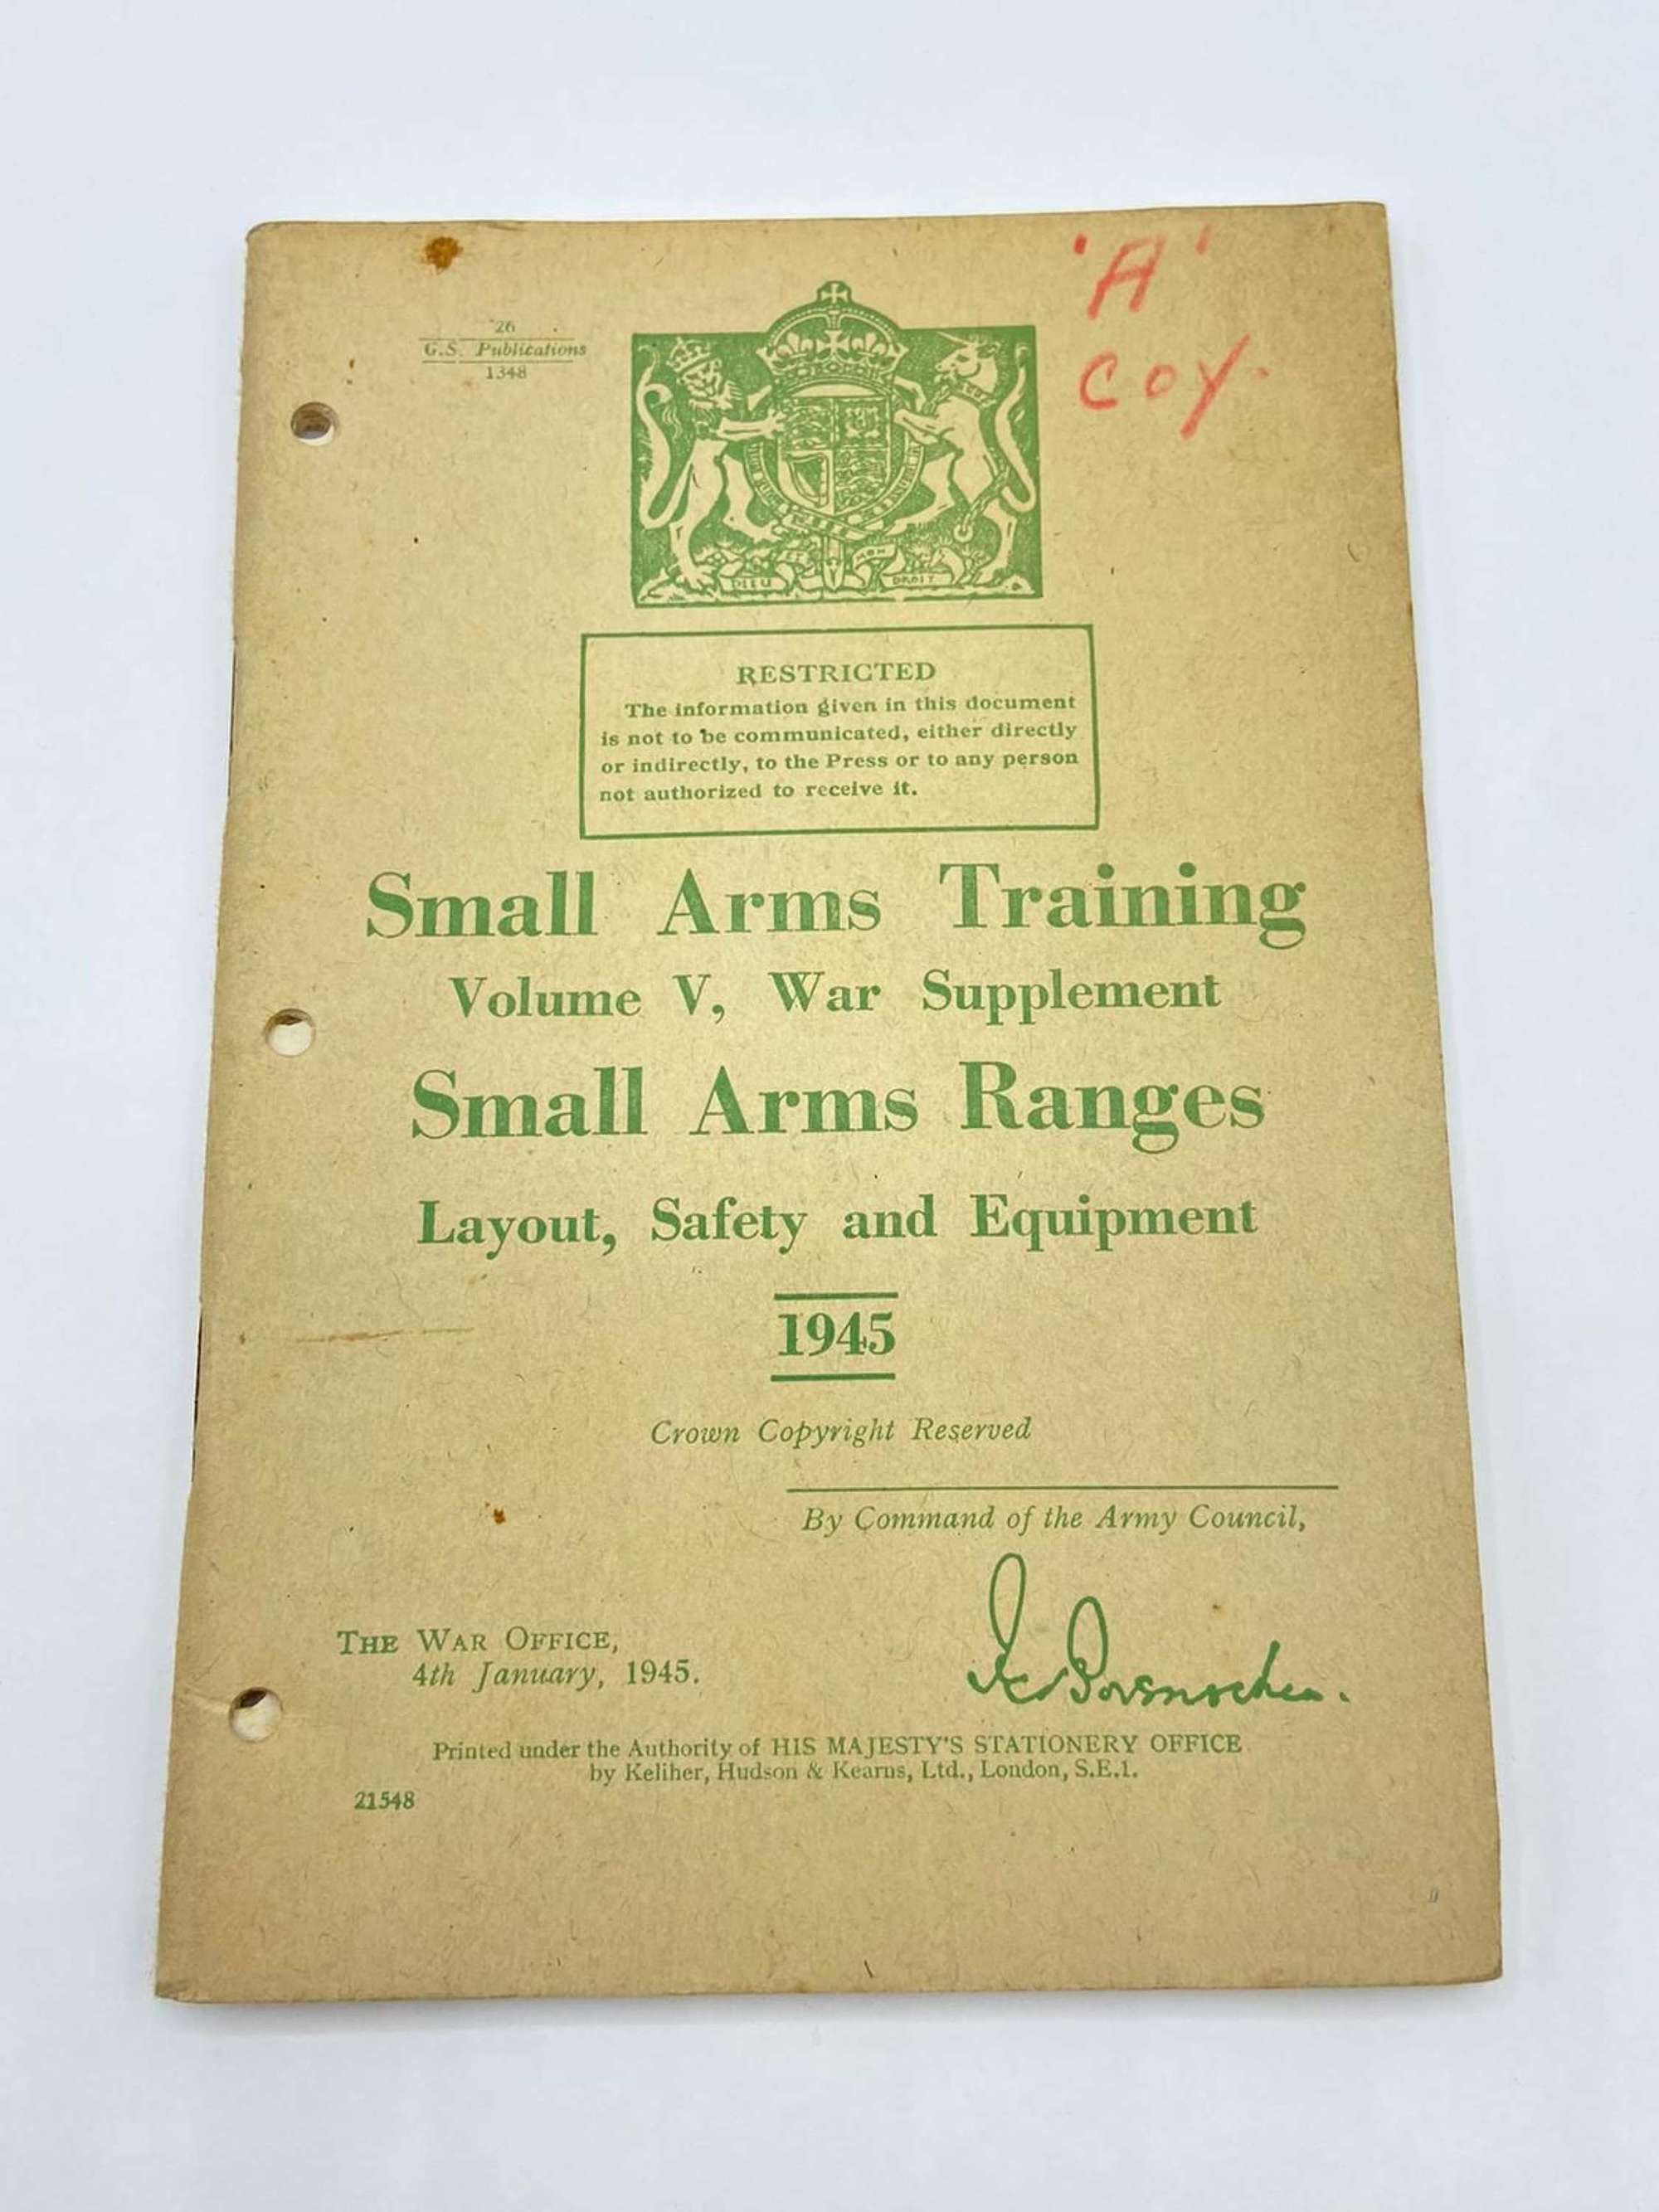 WW2 British Small Arms Ranges , Layouts, Safety & Equipment Pamphlet